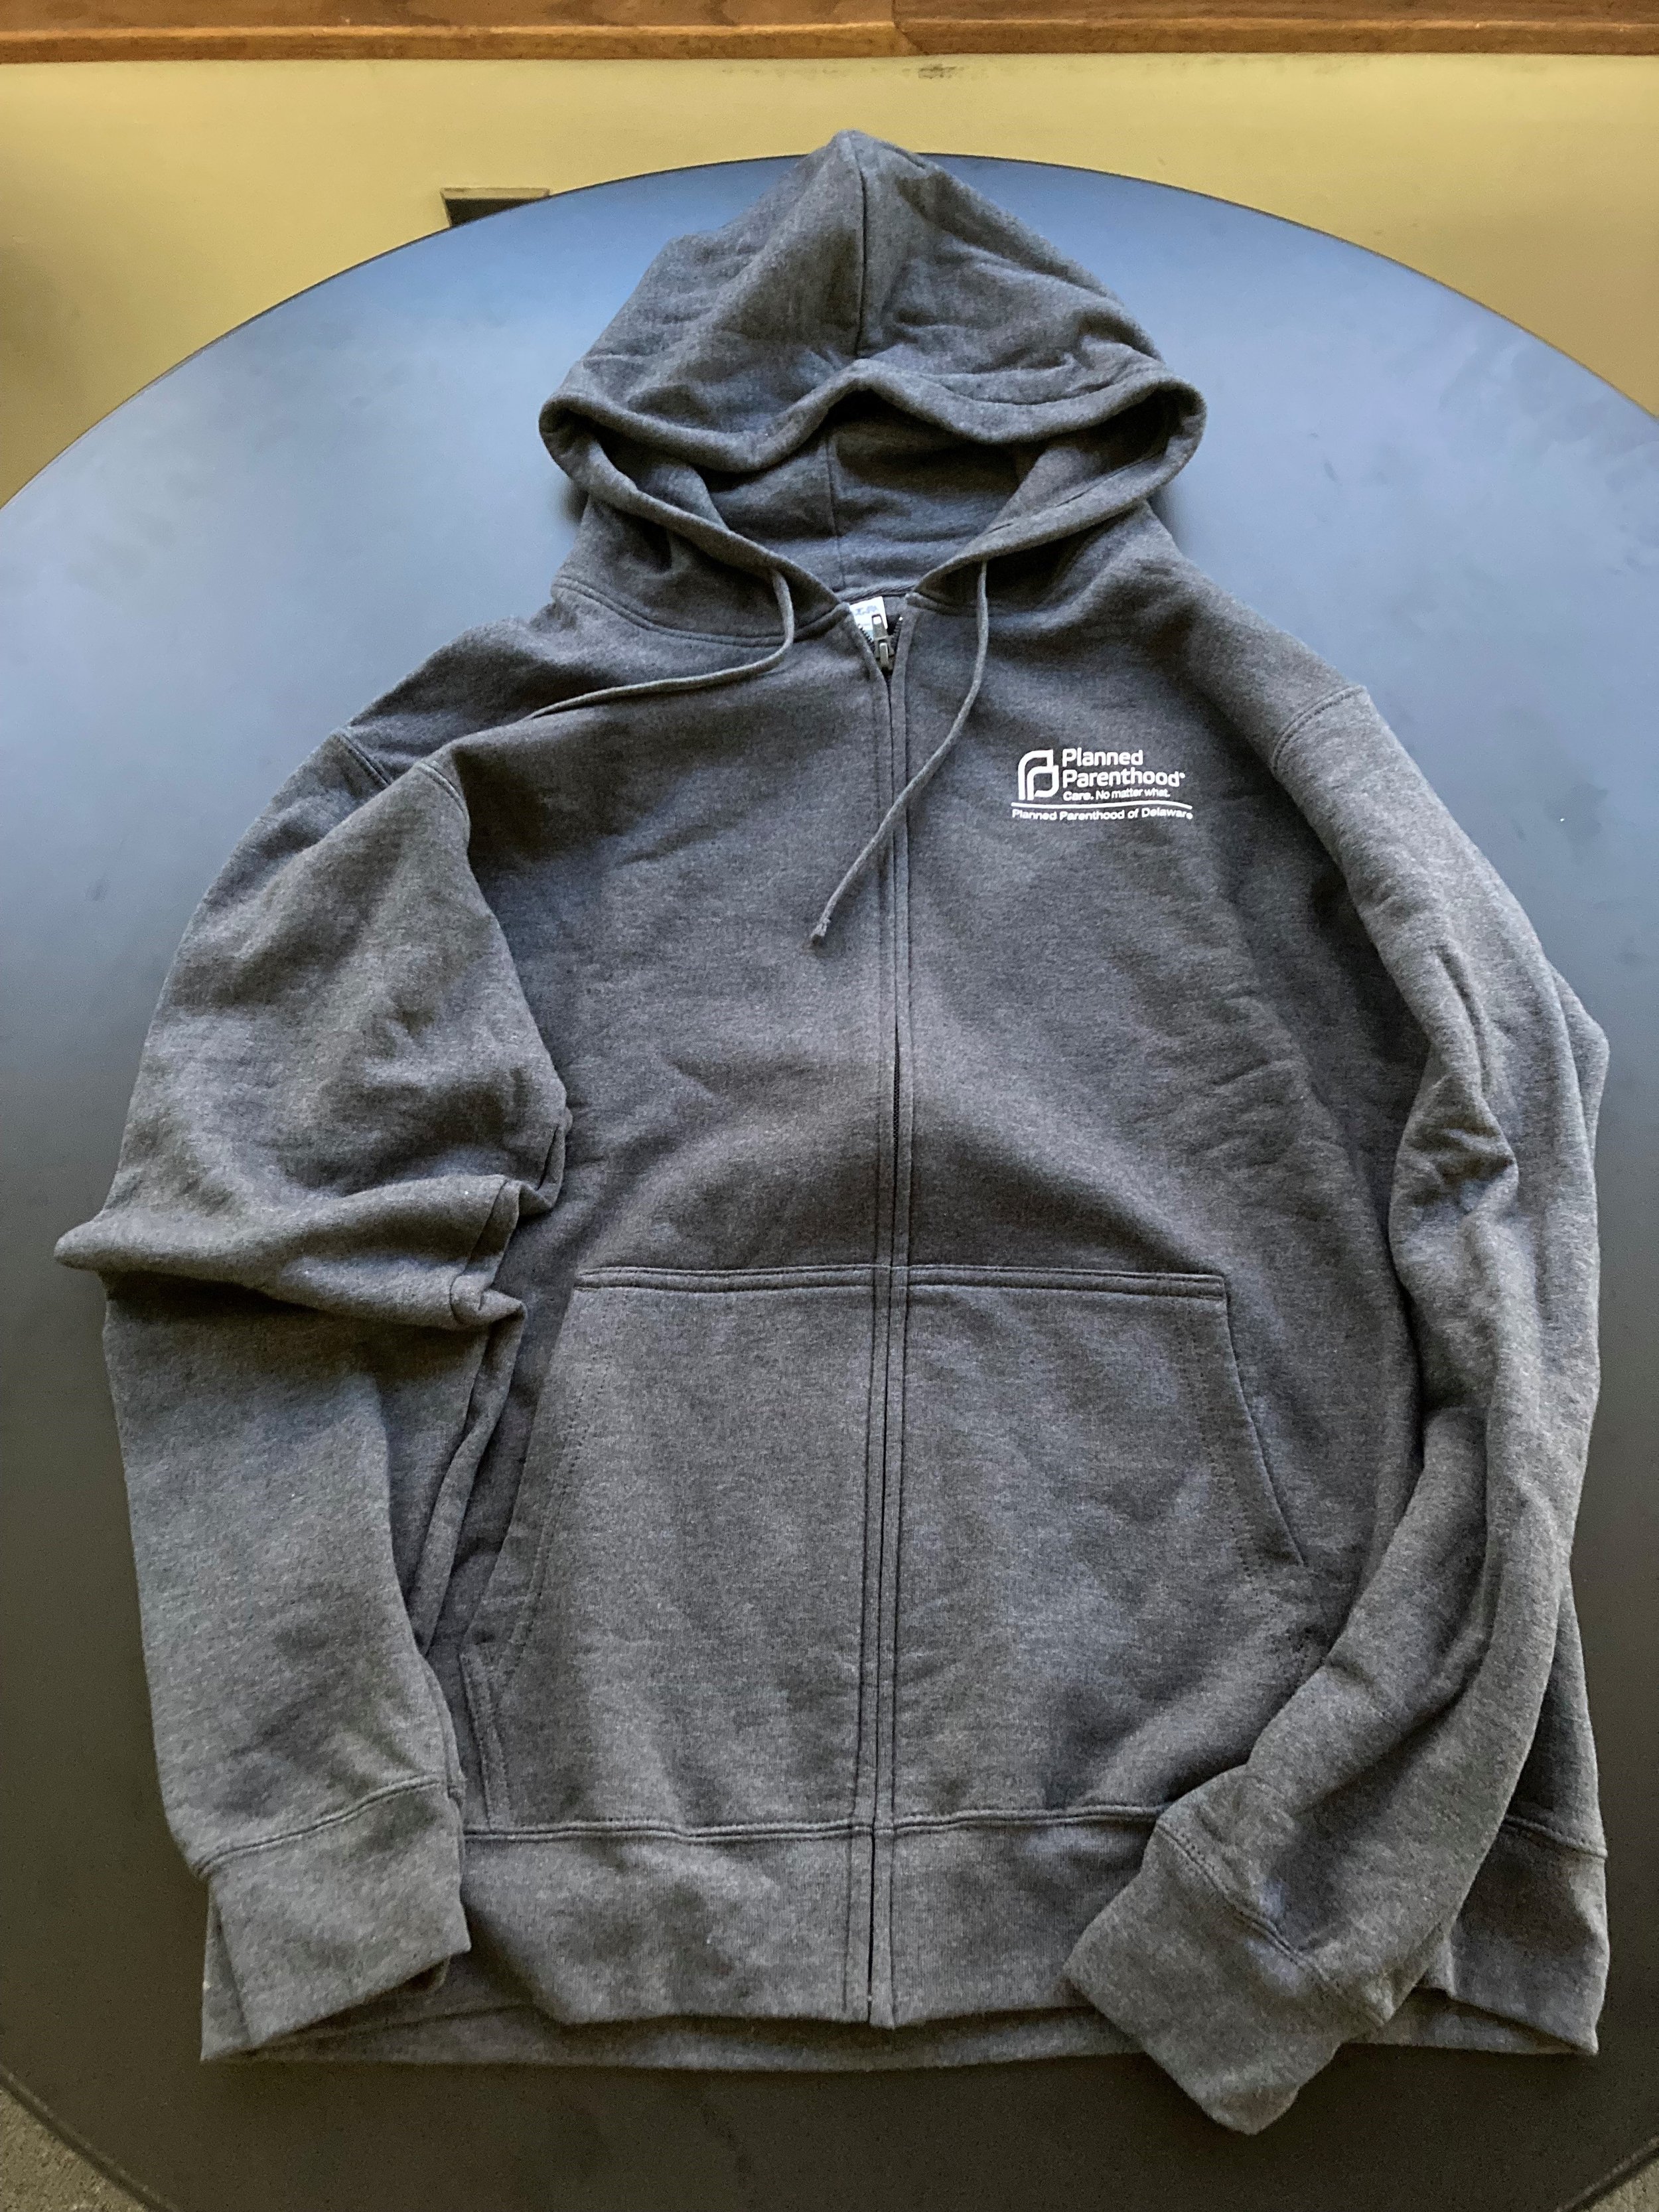 Hoodie — Planned Parenthood Advocacy Fund of Delaware